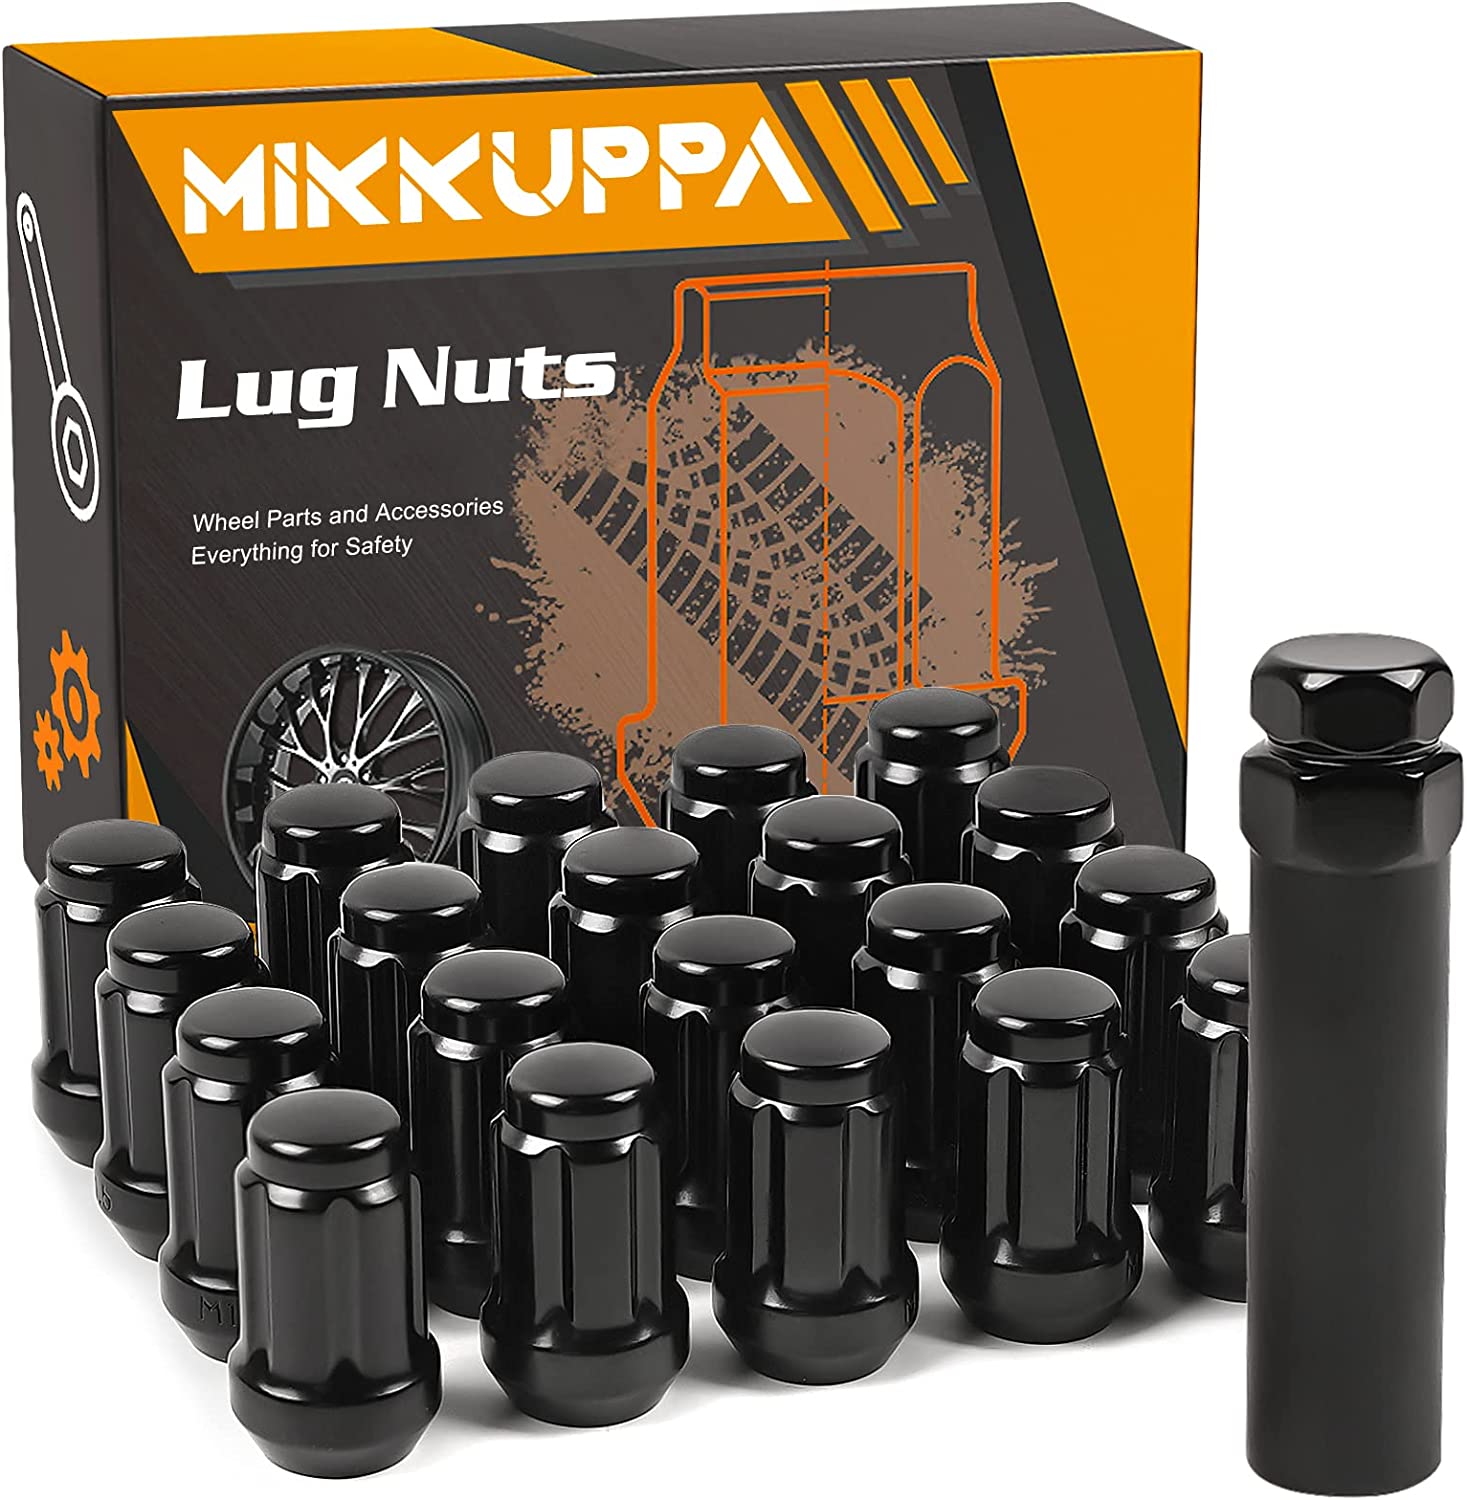 MIKKUPPA M12x1.5 Lug Nuts Replacement for 1994-2013 Chevy Impala, 19